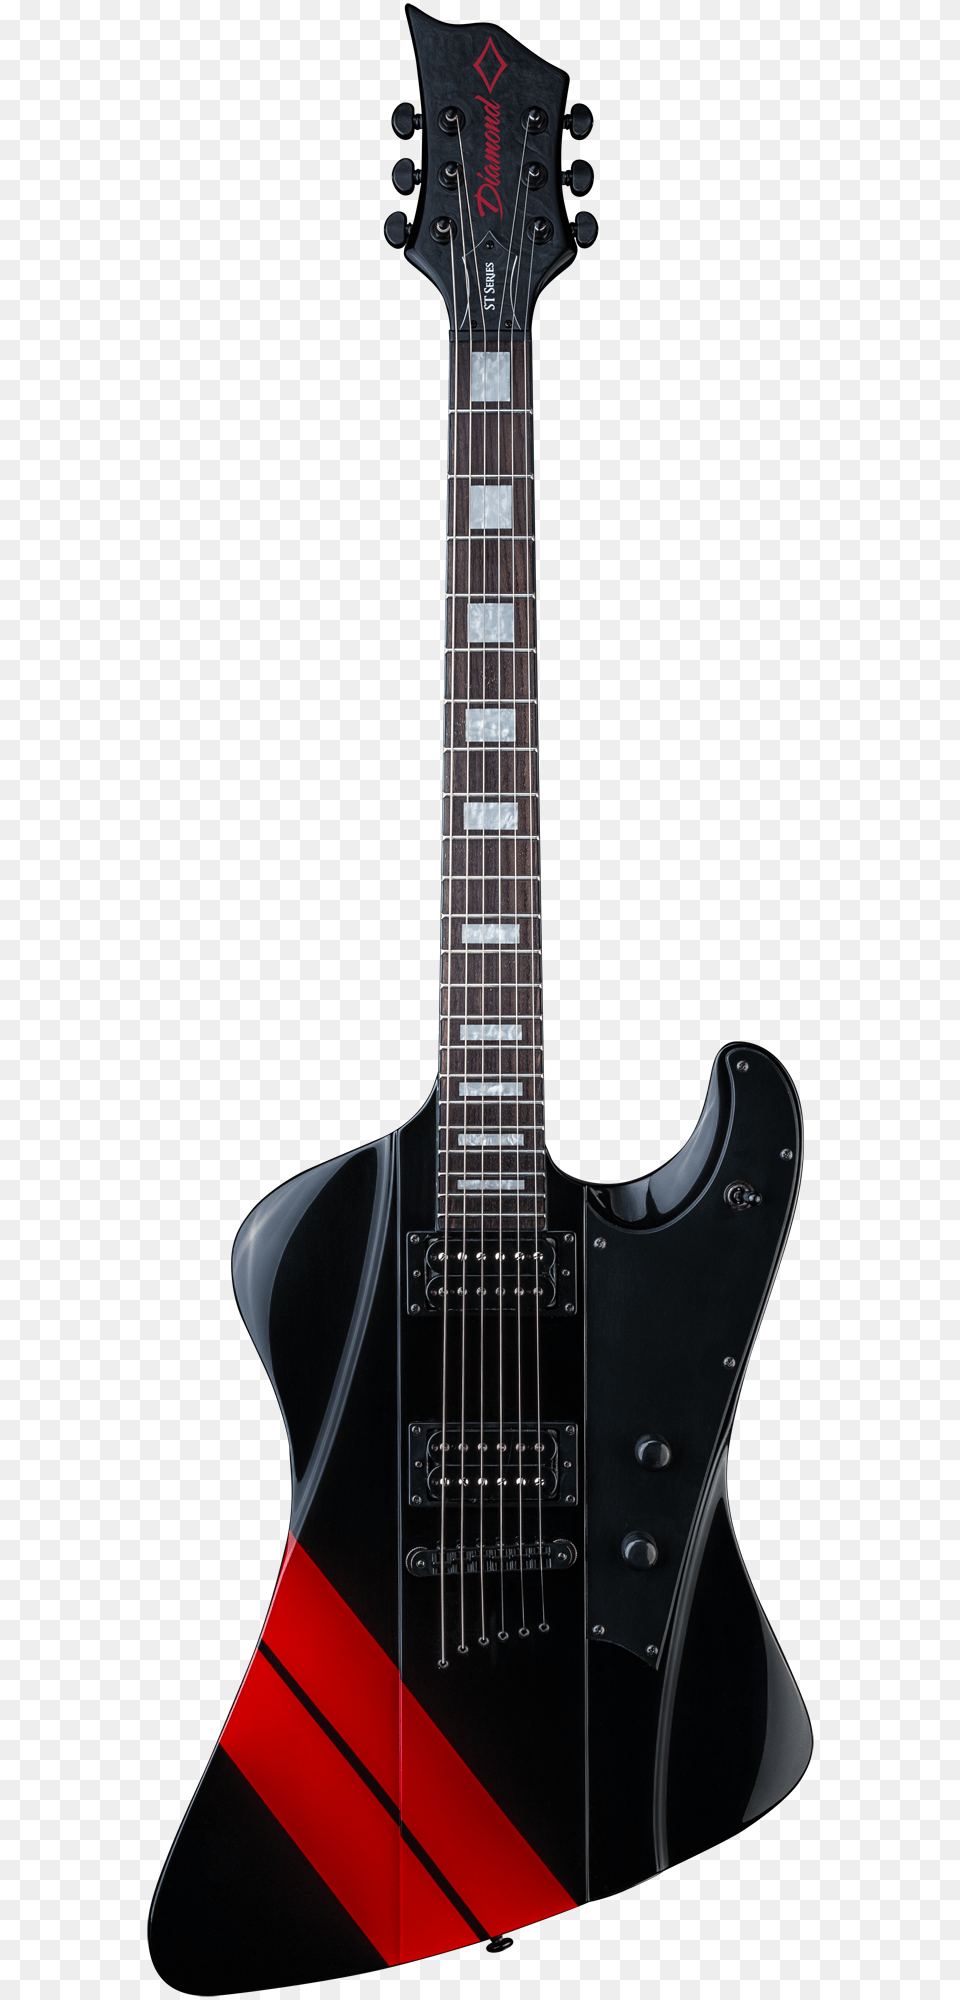 Black And Red Electric Guitar, Electric Guitar, Musical Instrument, Bass Guitar Png Image